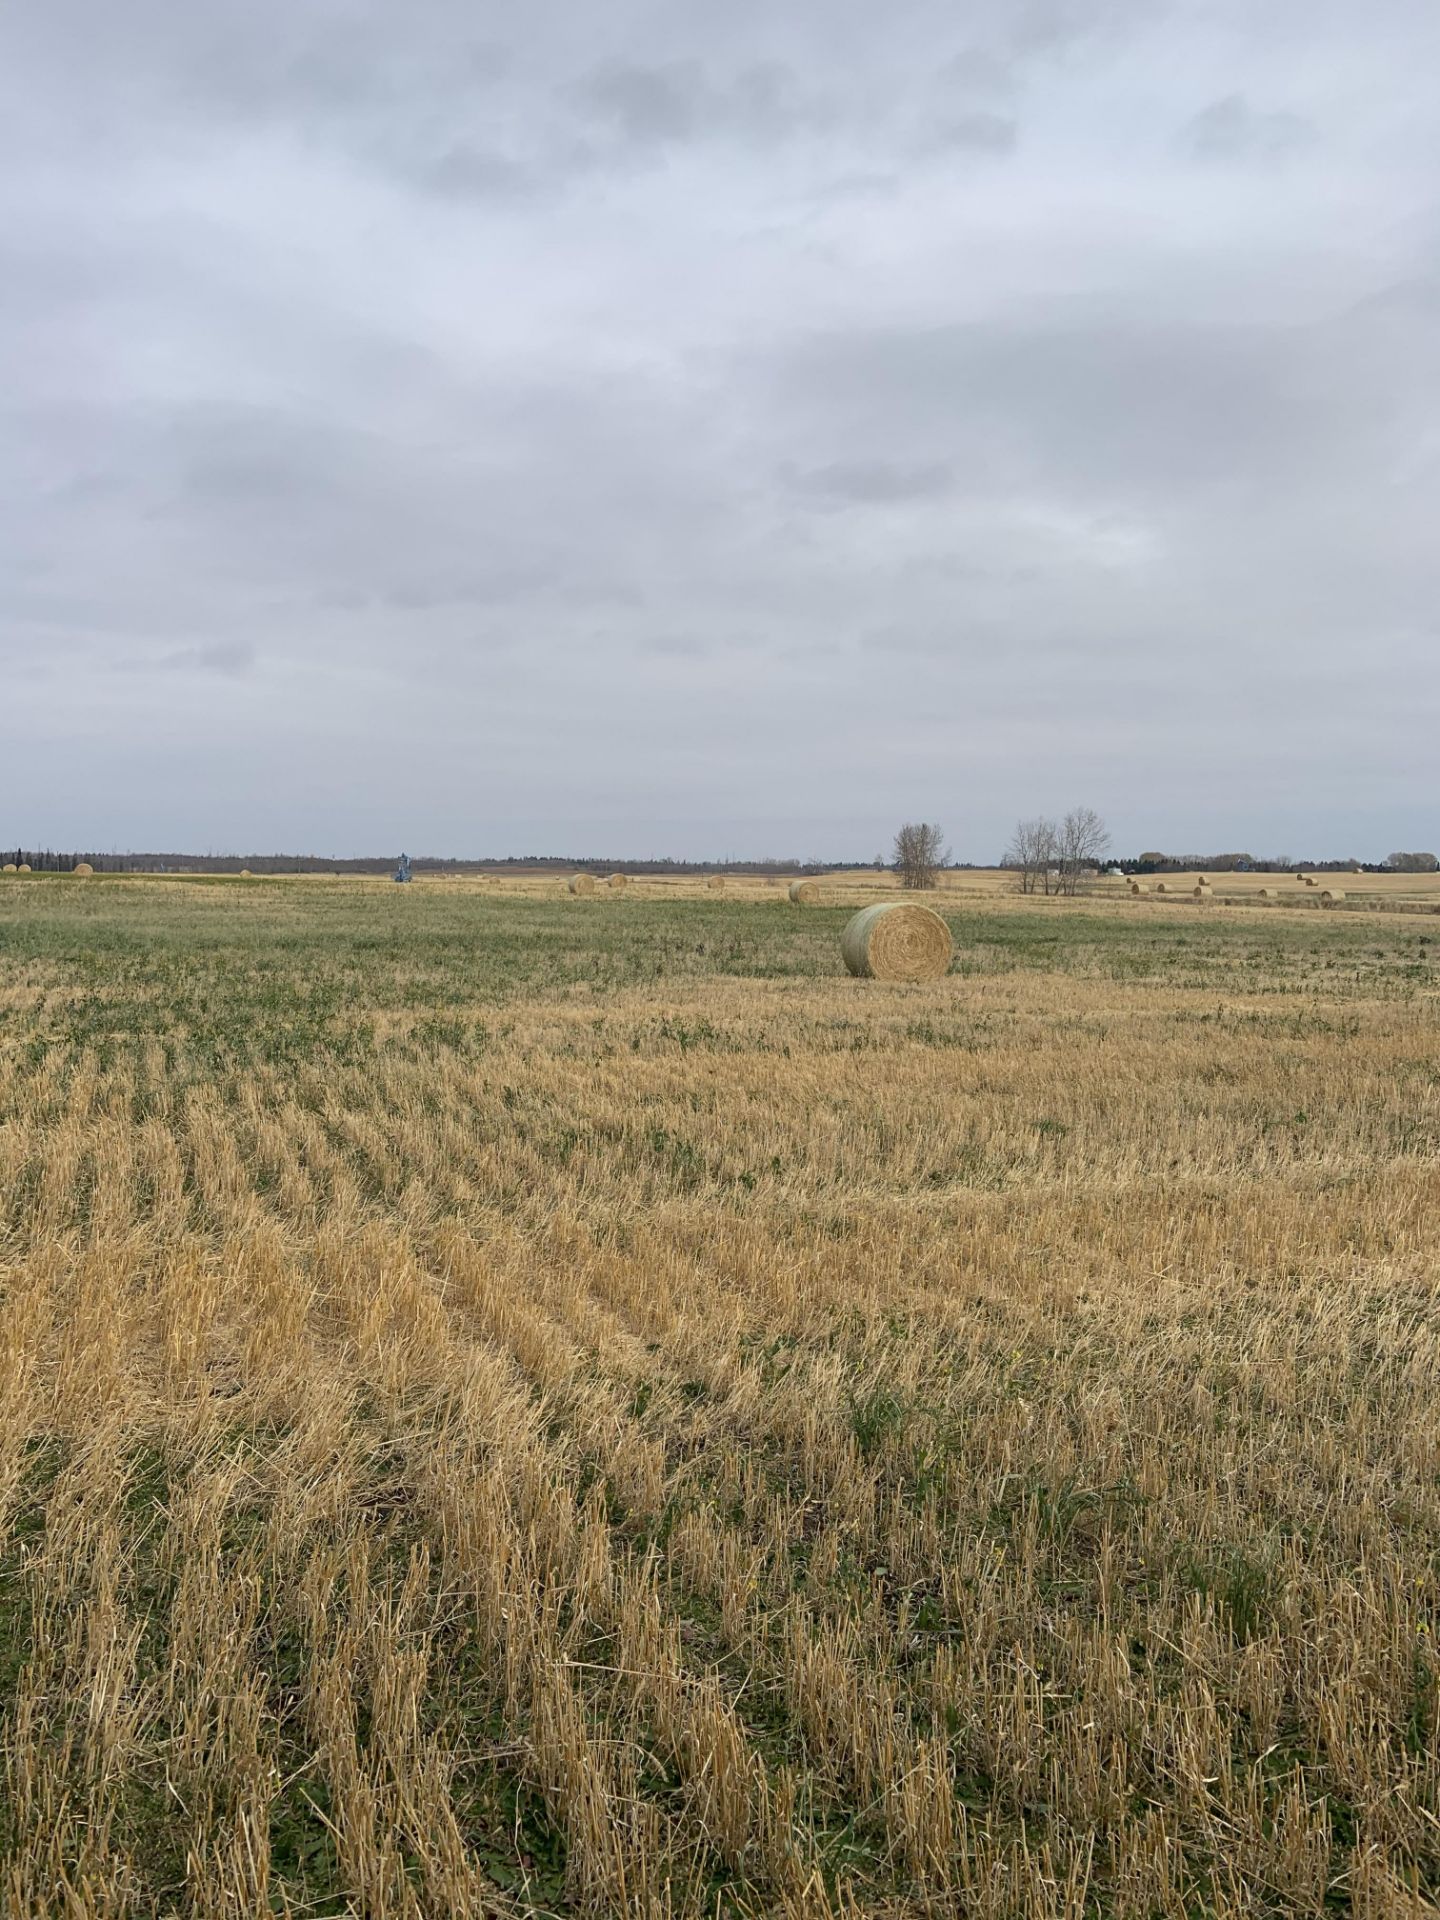 160+/- Total Acres NW 8-56-20-W4, Bruderheim, AB, consisting of Crop Land, Surface Lease & Yard Site - Image 30 of 34